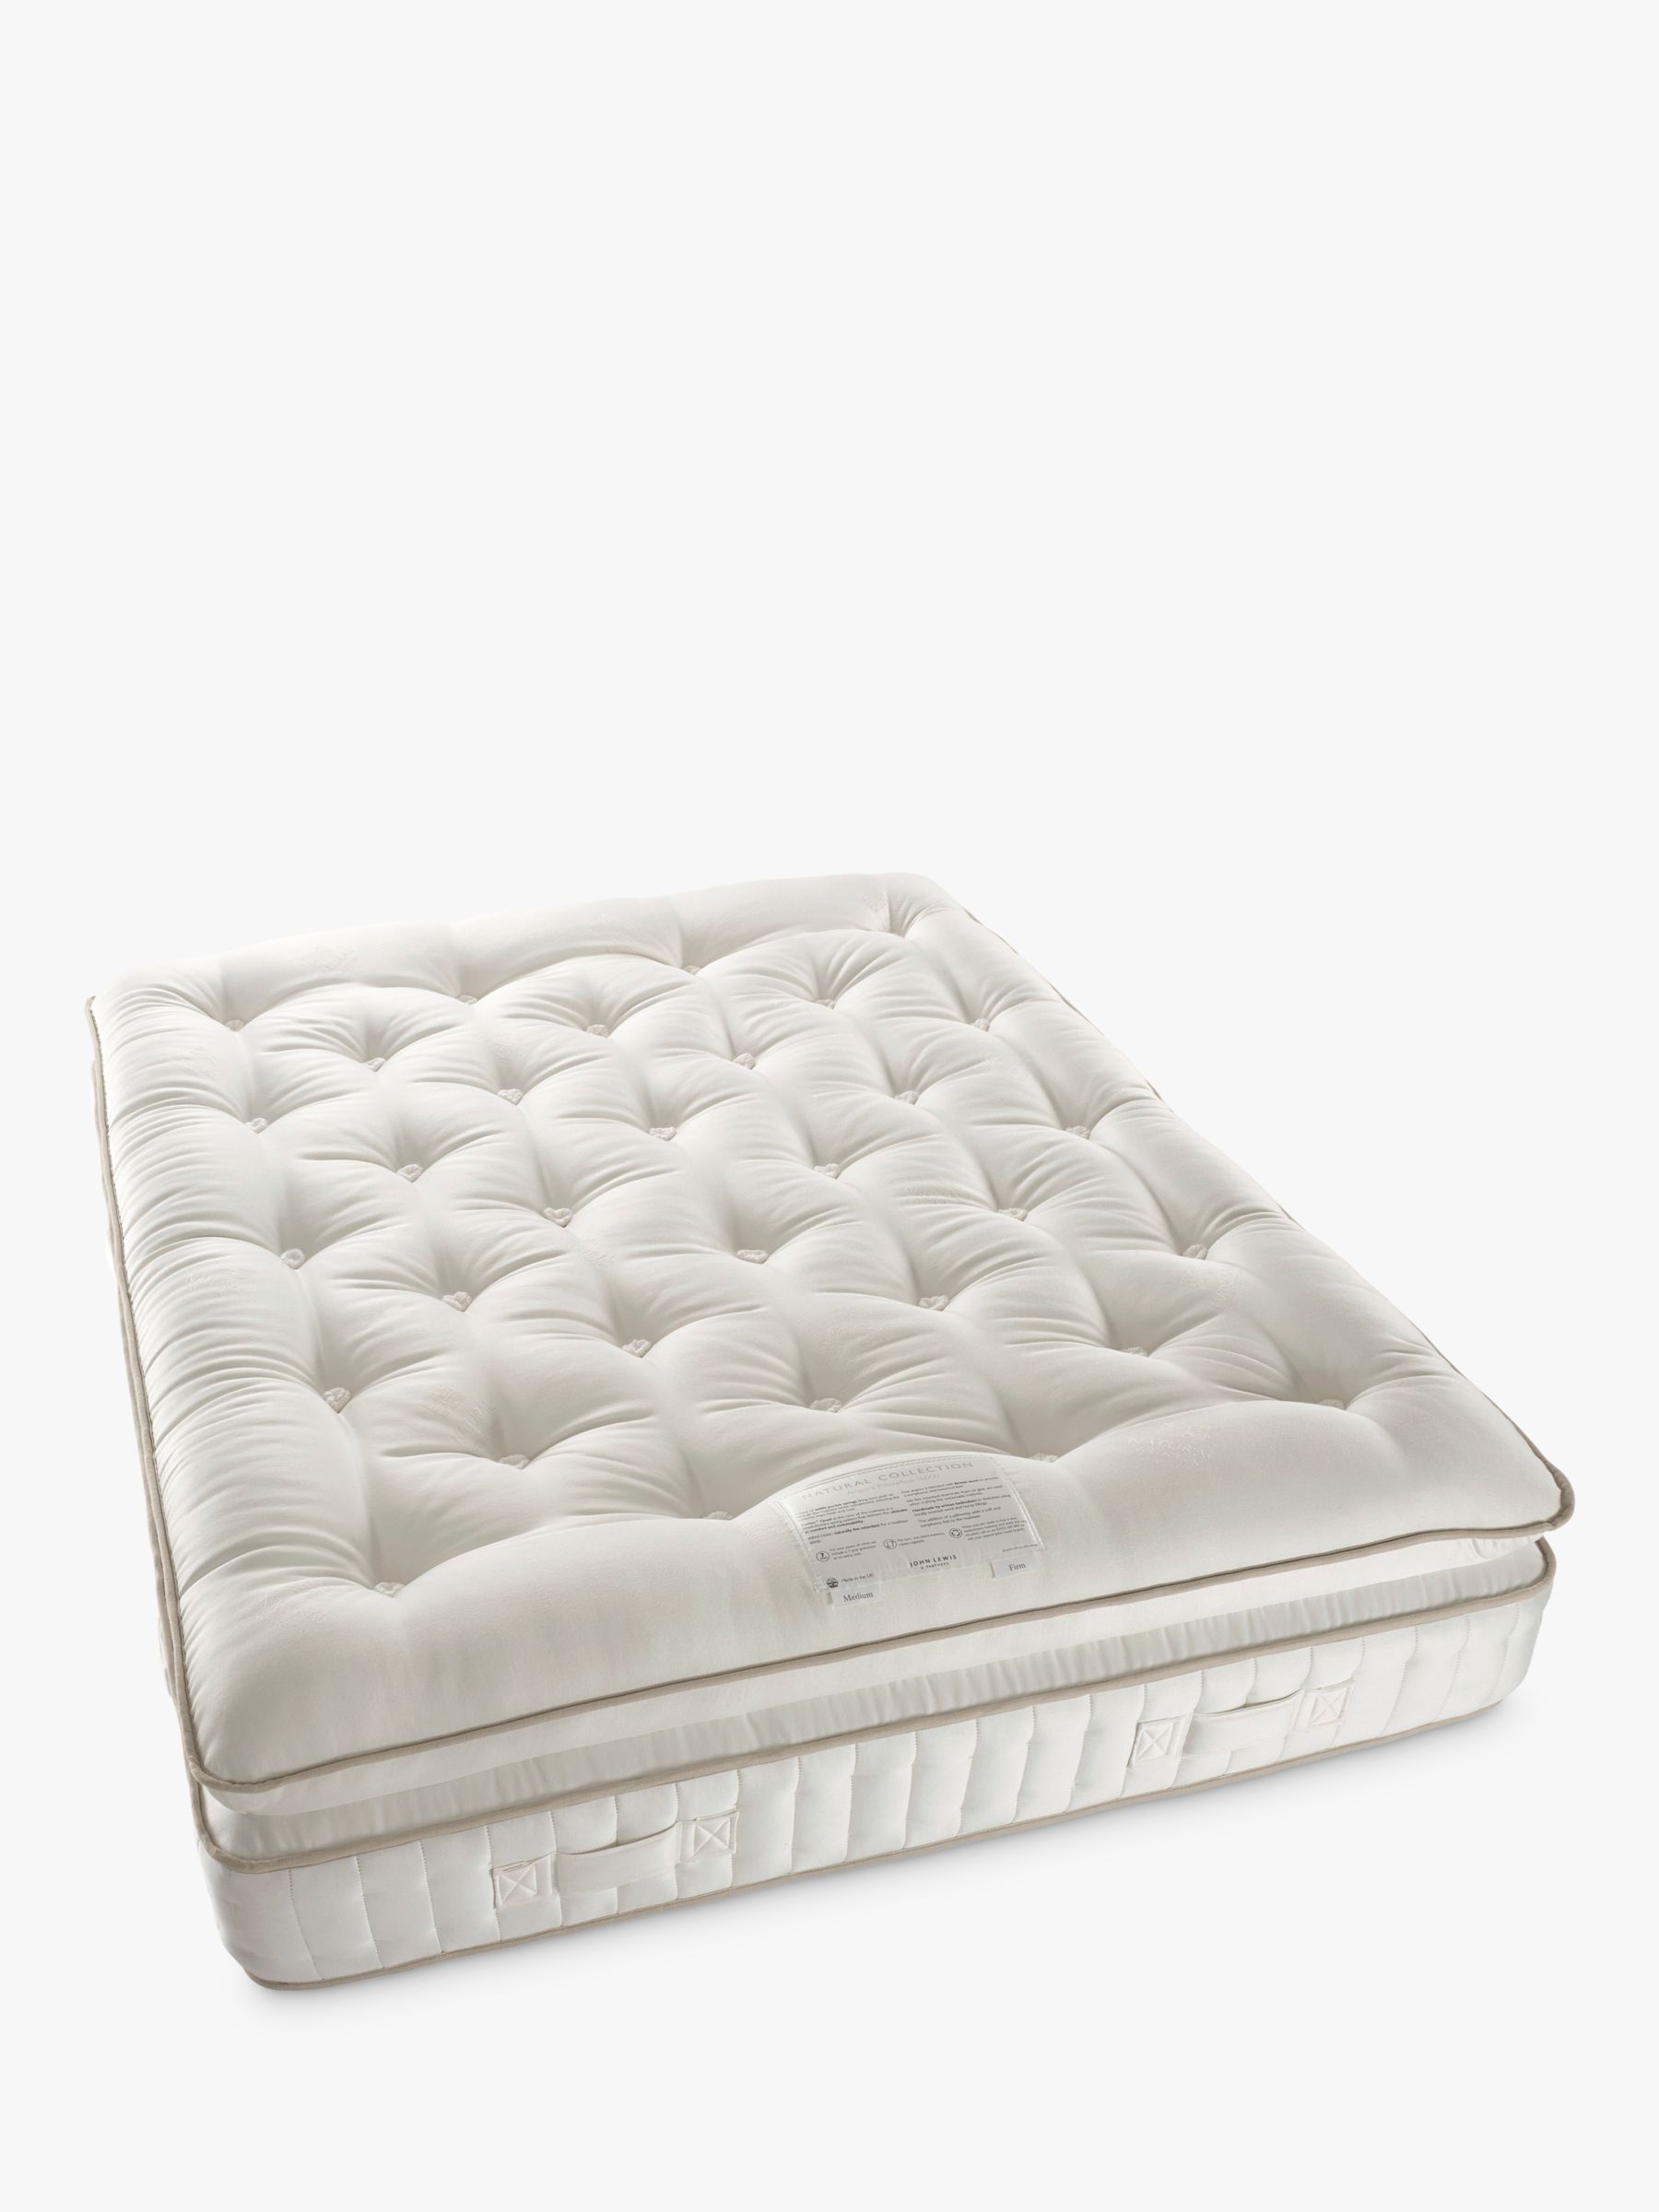 Photo of John lewis luxury natural collection mohair pillowtop 16000 double firmer tension pocket spring mattress